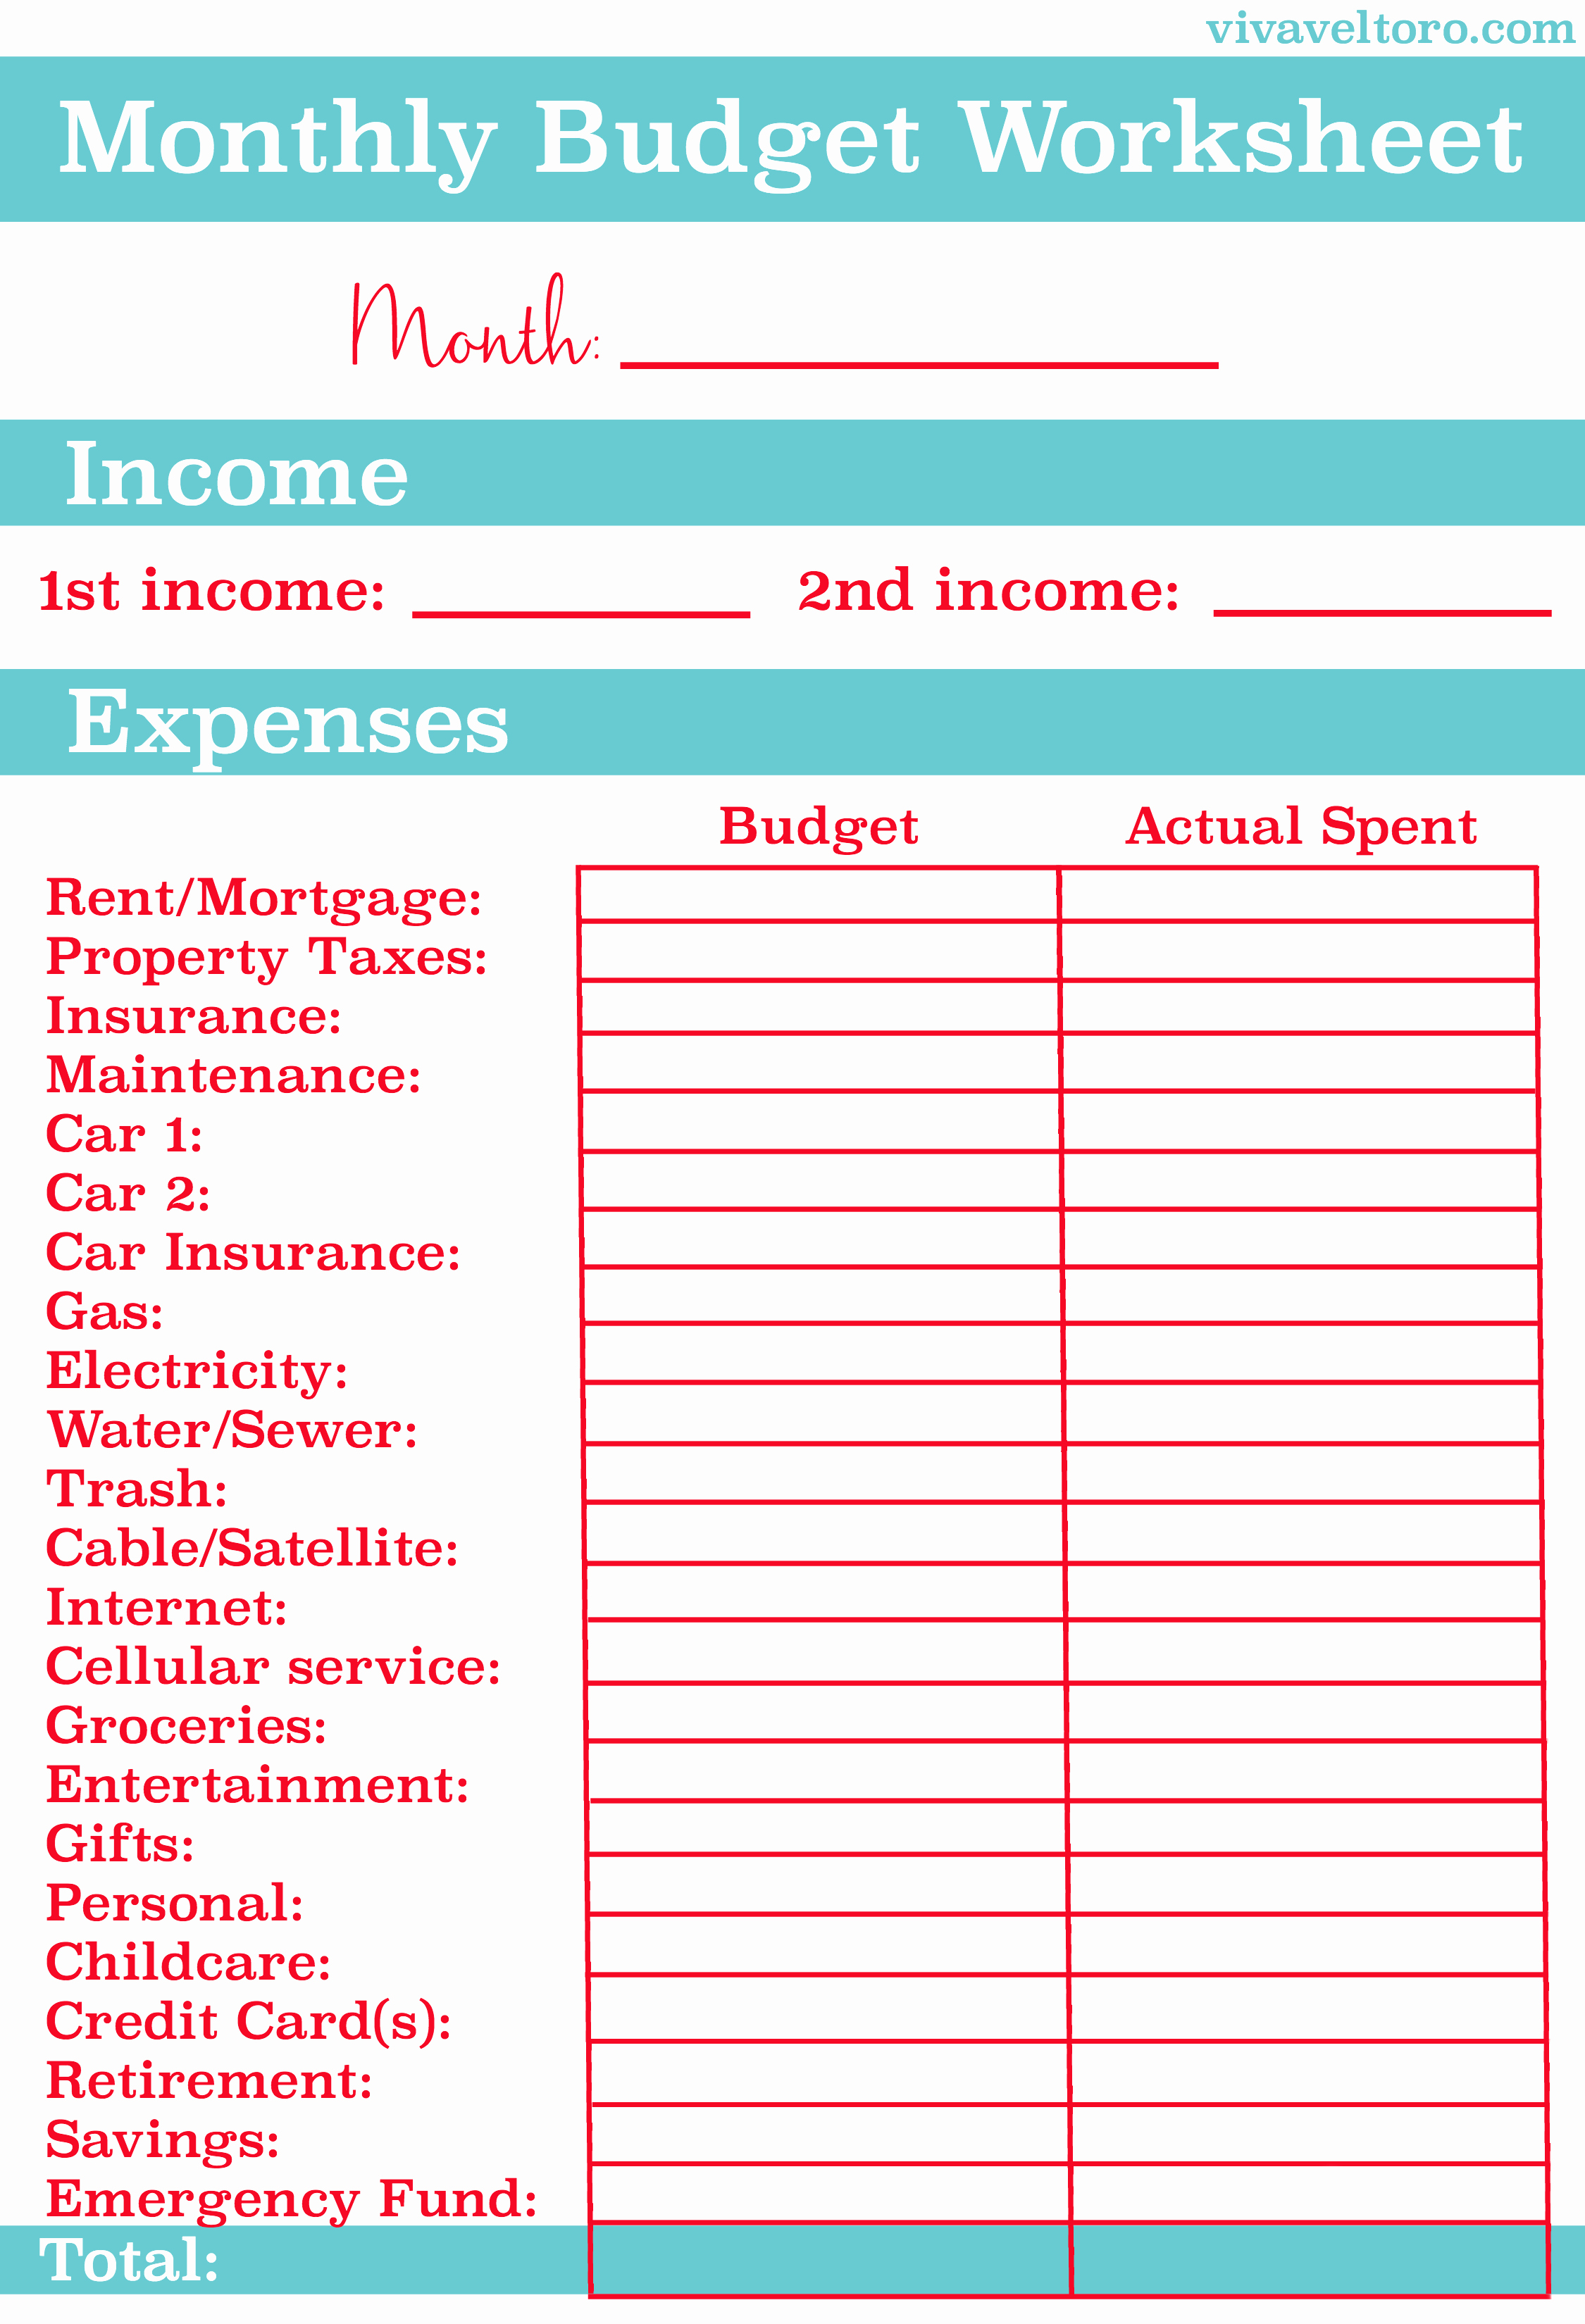 Monthly Budget Spreadsheet Template Best Of Take Control Of Your Personal Finances with This Free